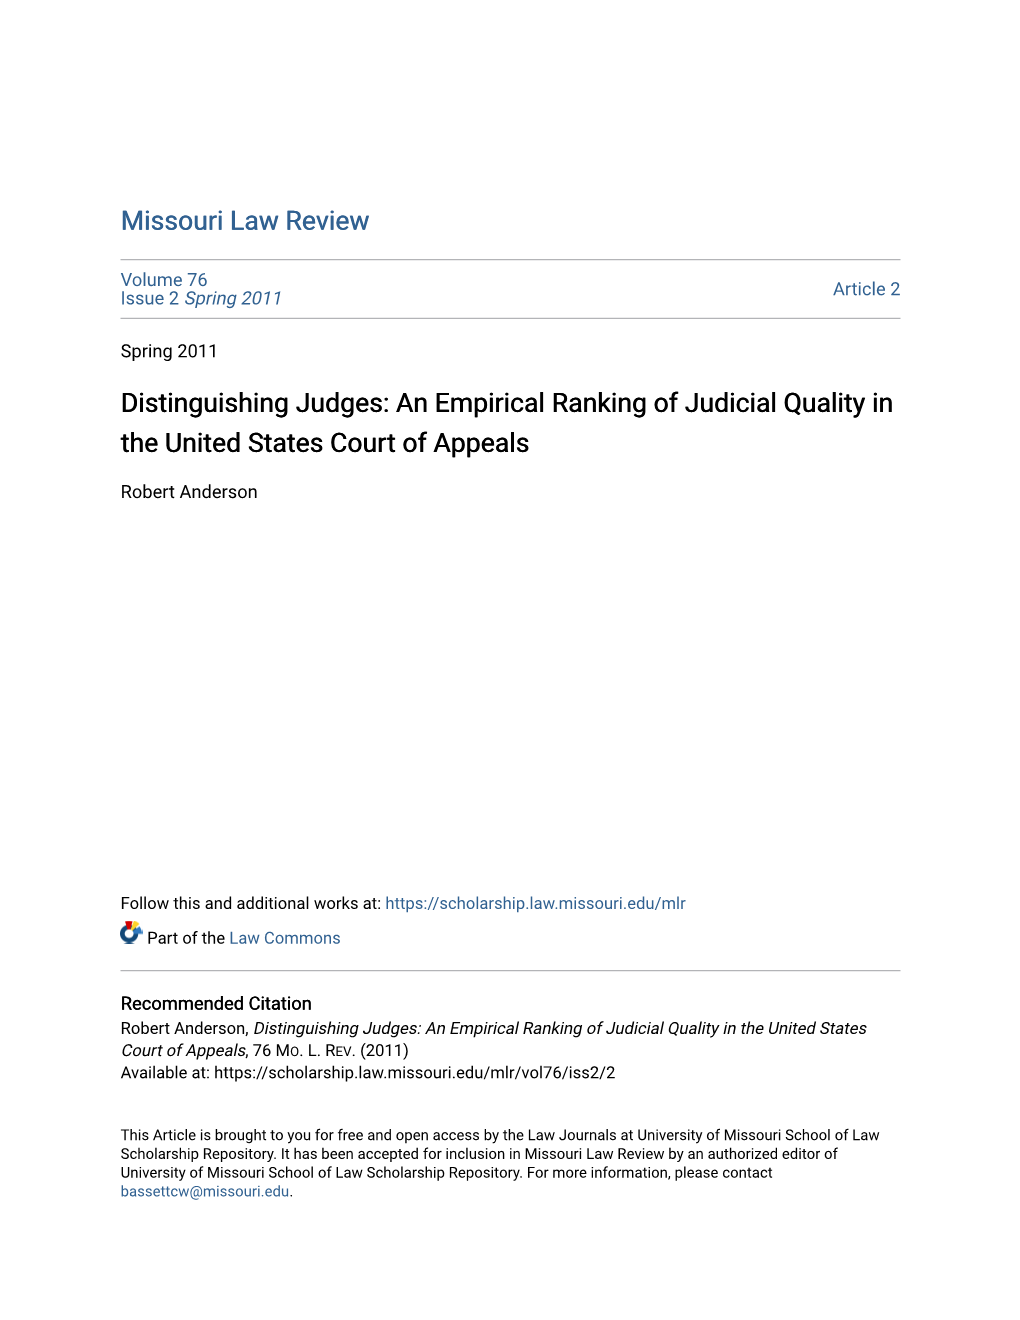 Distinguishing Judges: an Empirical Ranking of Judicial Quality in the United States Court of Appeals